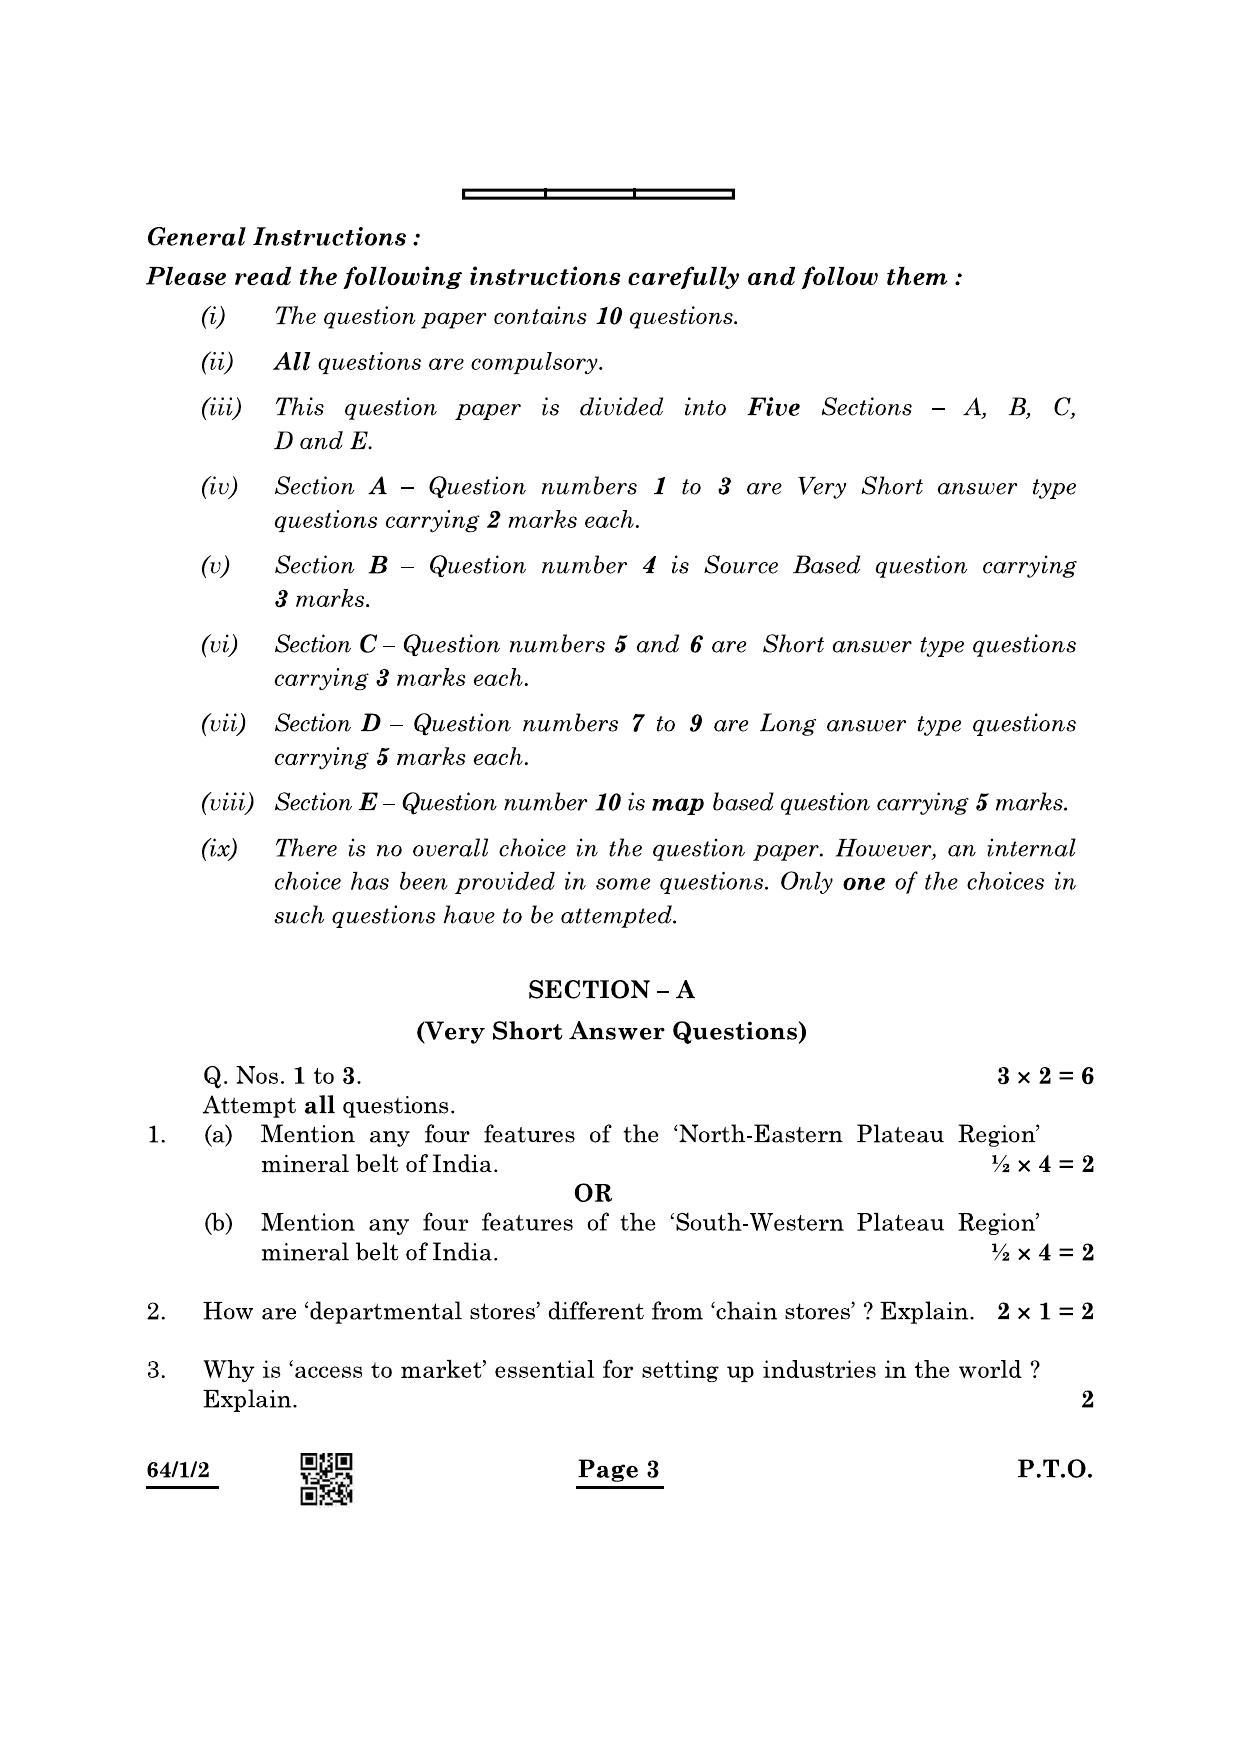 CBSE Class 12 64-1-2 Geography 2022 Question Paper - Page 3